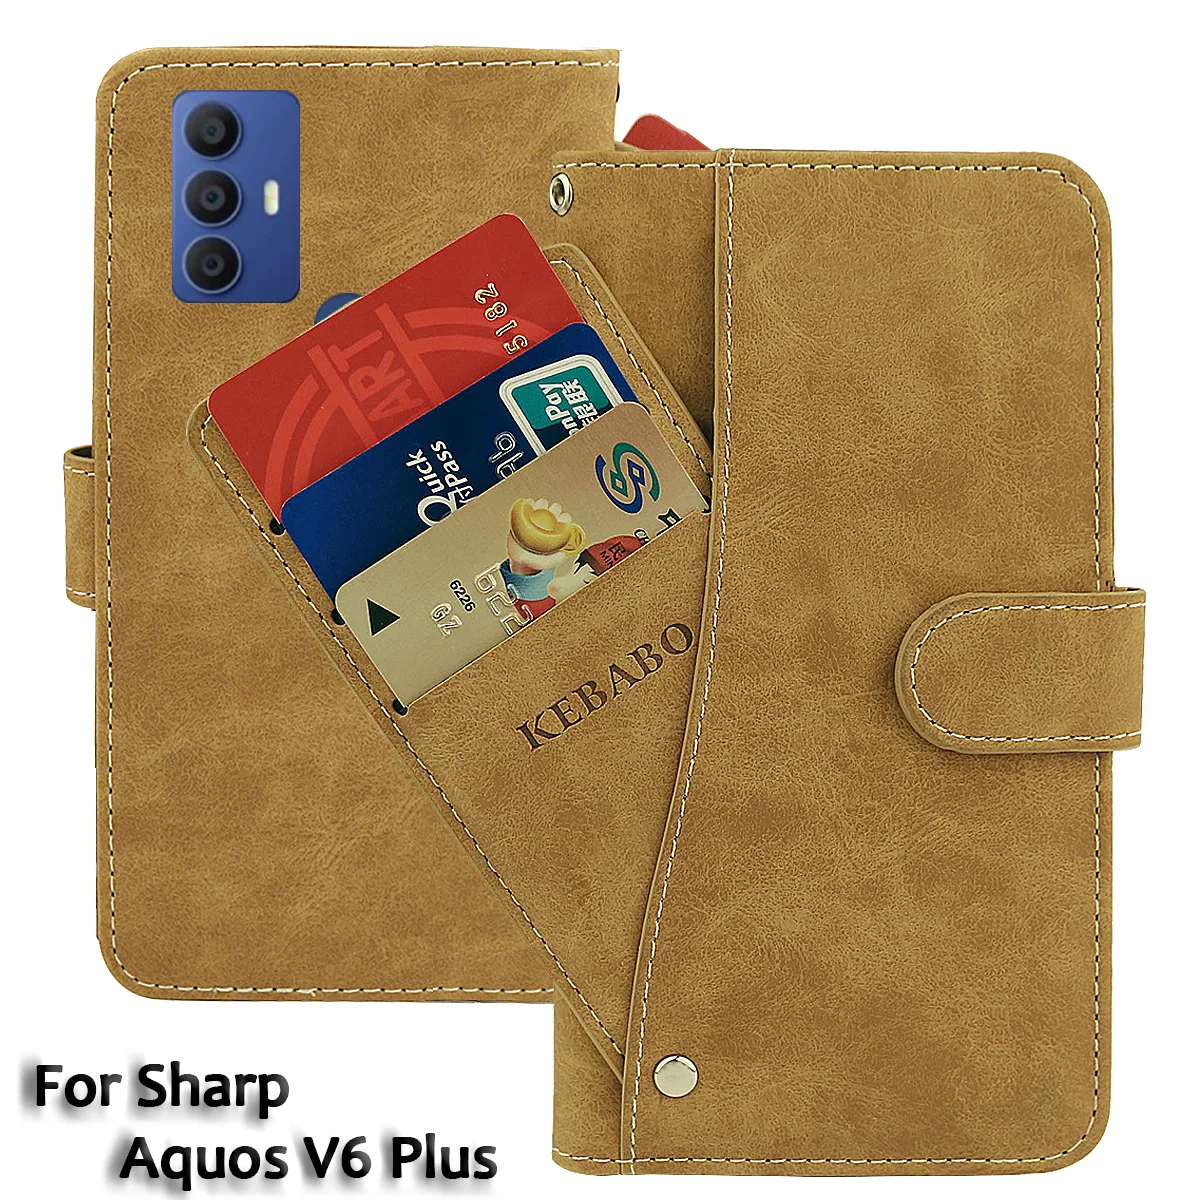 

Vintage Leather Wallet For Sharp Aquos V6 Plus Case 6.52" Flip Luxury Card Slots Cover Magnet Phone Protective Cases Bags